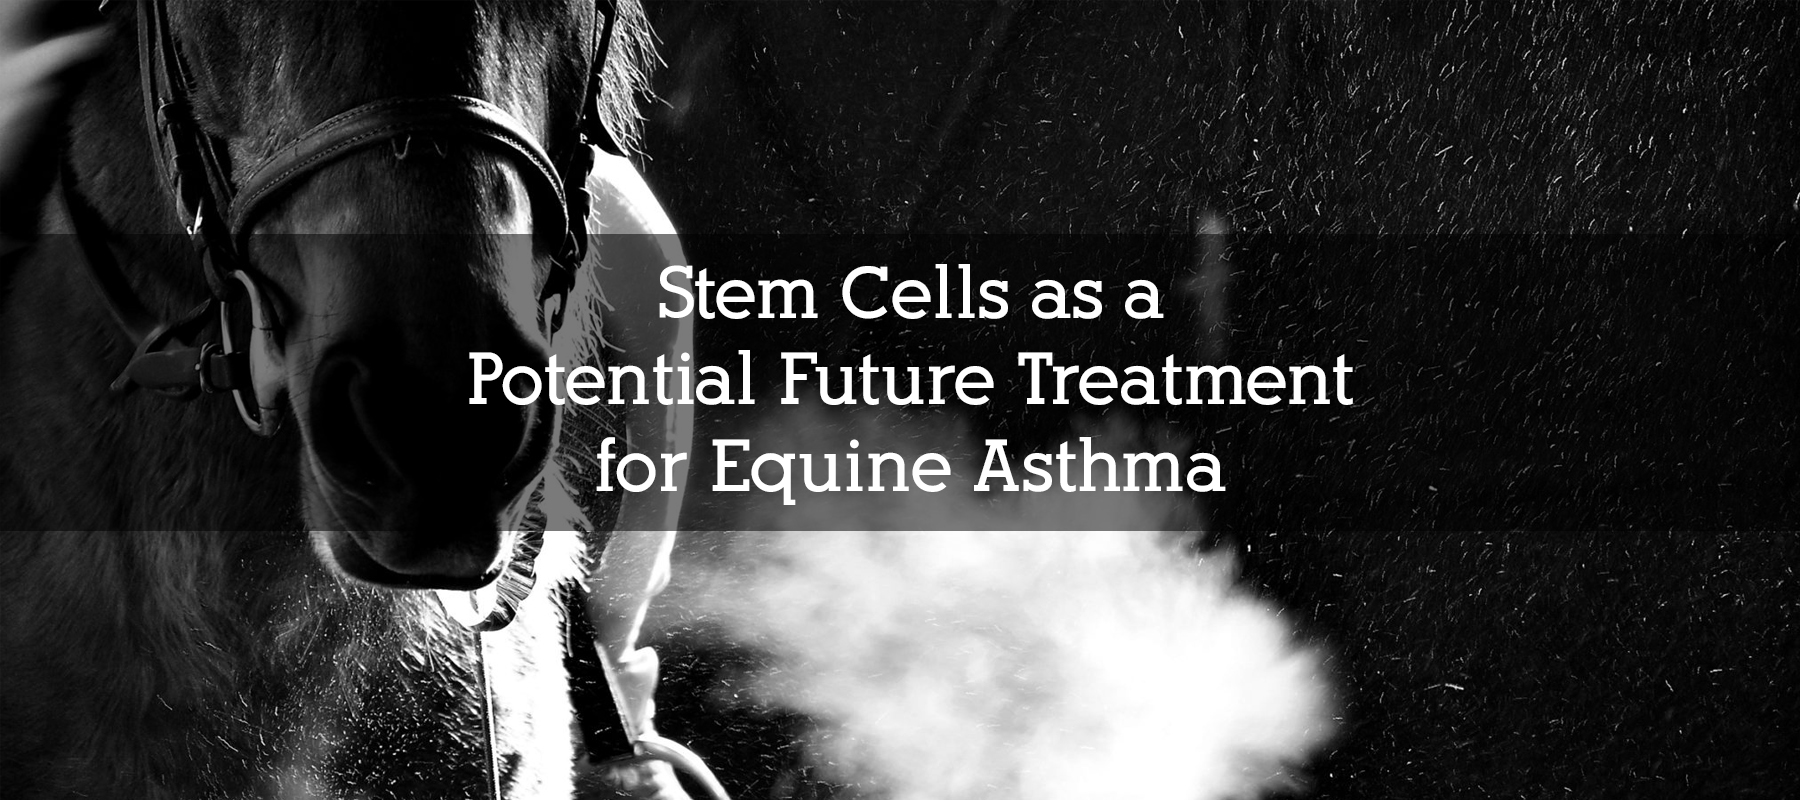 Stem Cells as a Potential Future Treatment for Equine Asthma